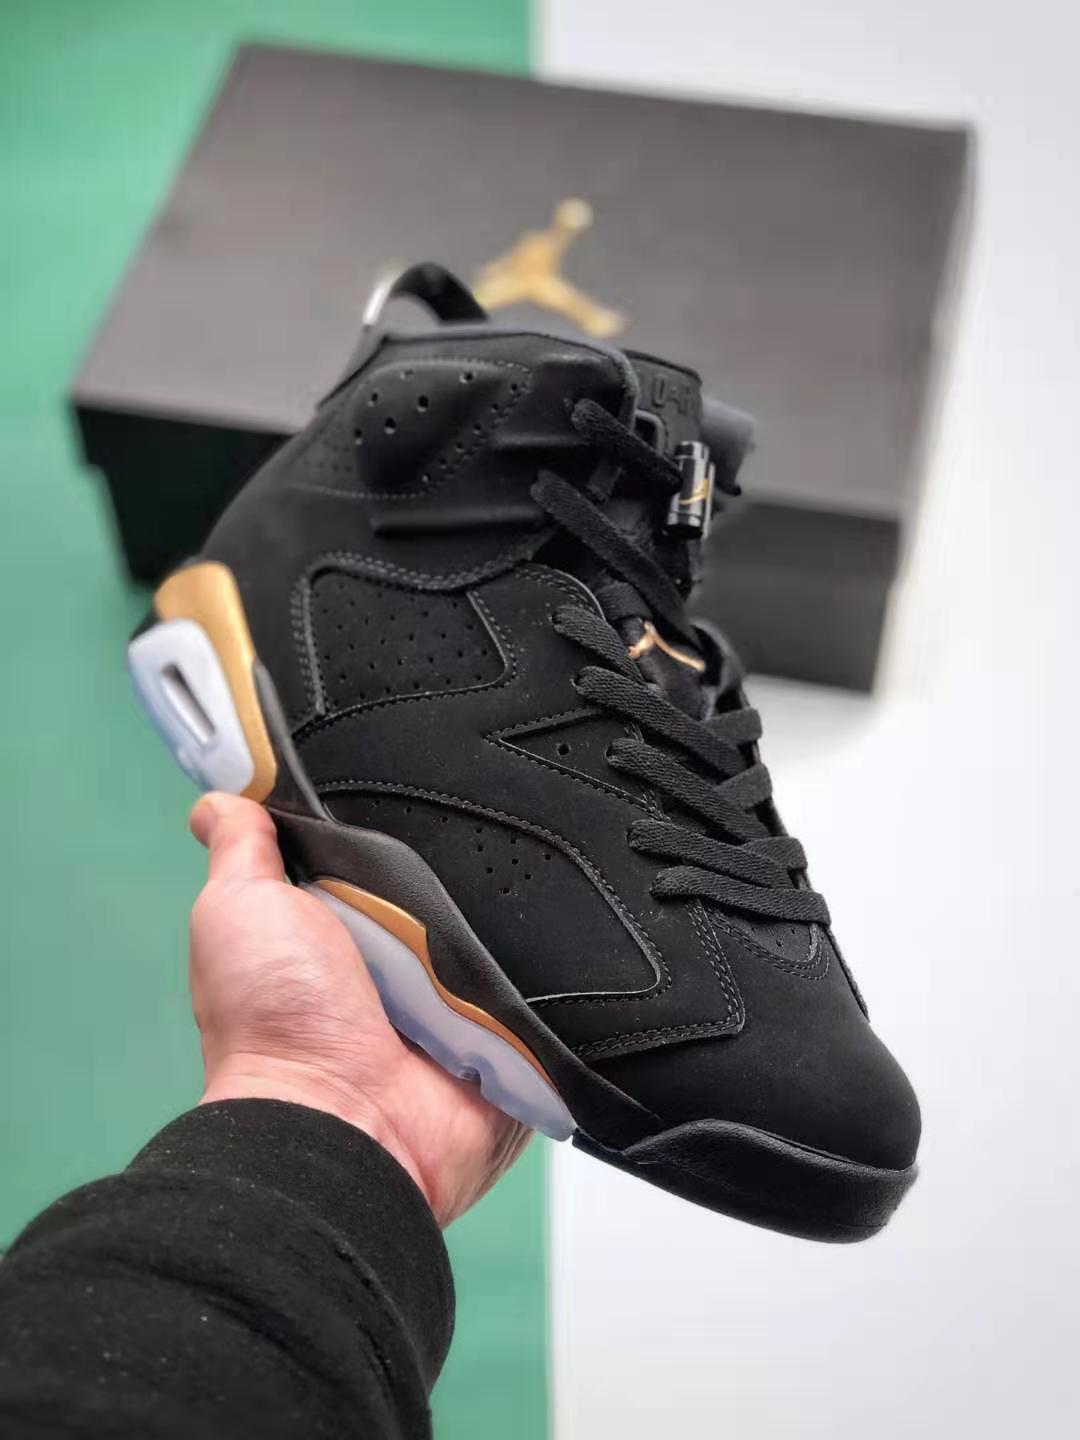 Air Jordan 6 Retro 'Defining Moments' 2020 CT4954-007 - Iconic Sneakers for Style Enthusiasts